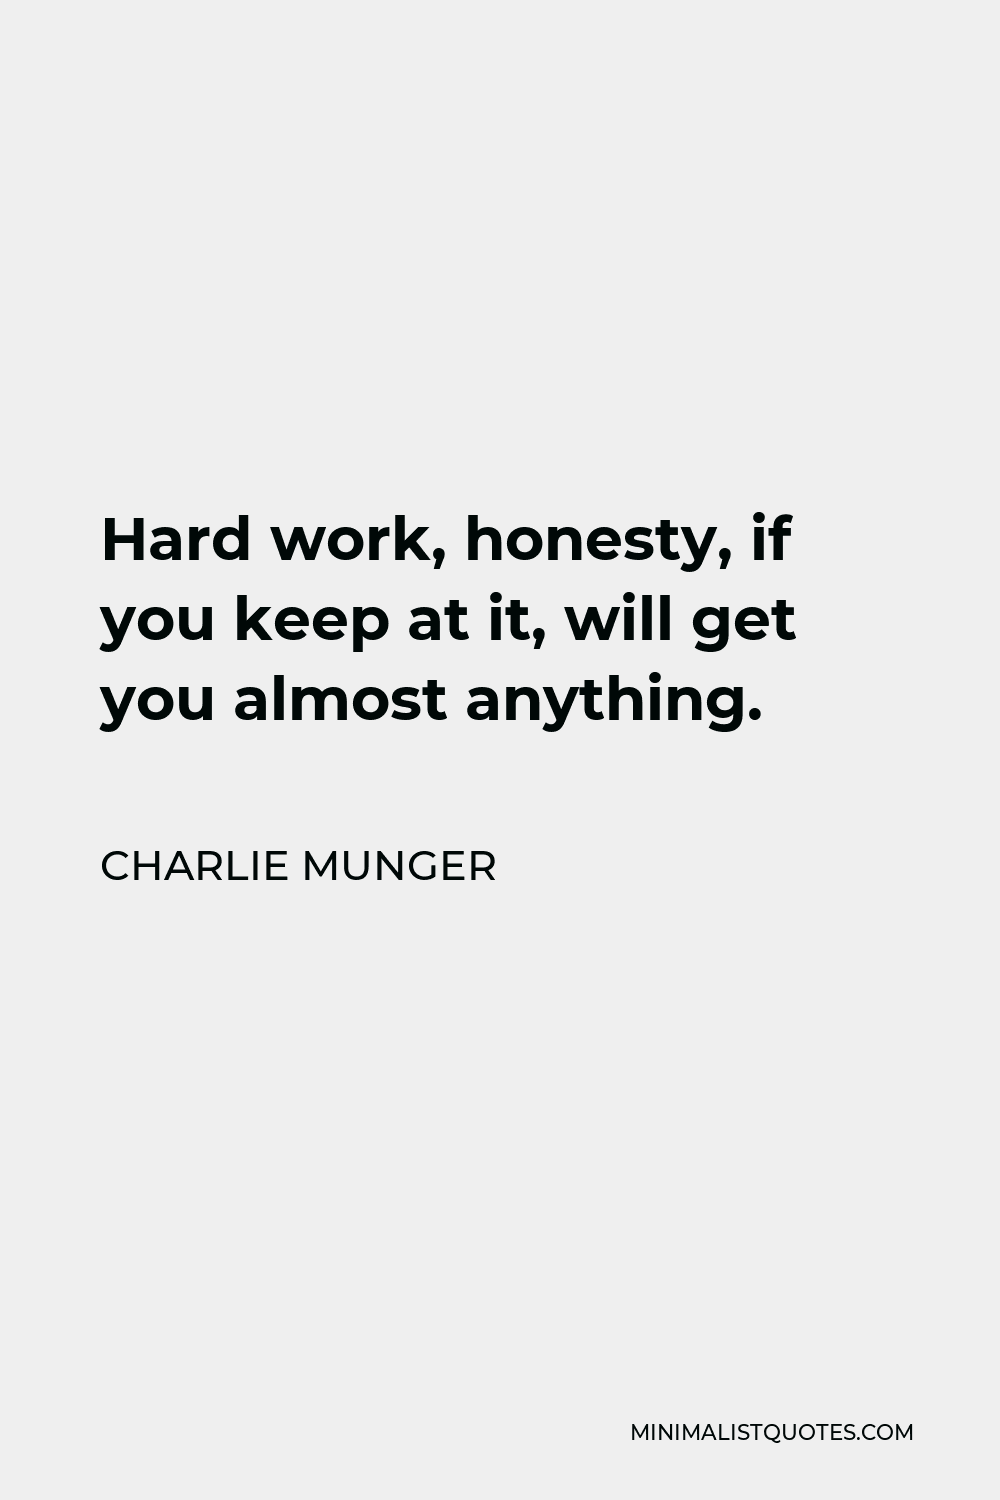 Charlie Munger Quote - Hard work, honesty, if you keep at it, will get you almost anything.